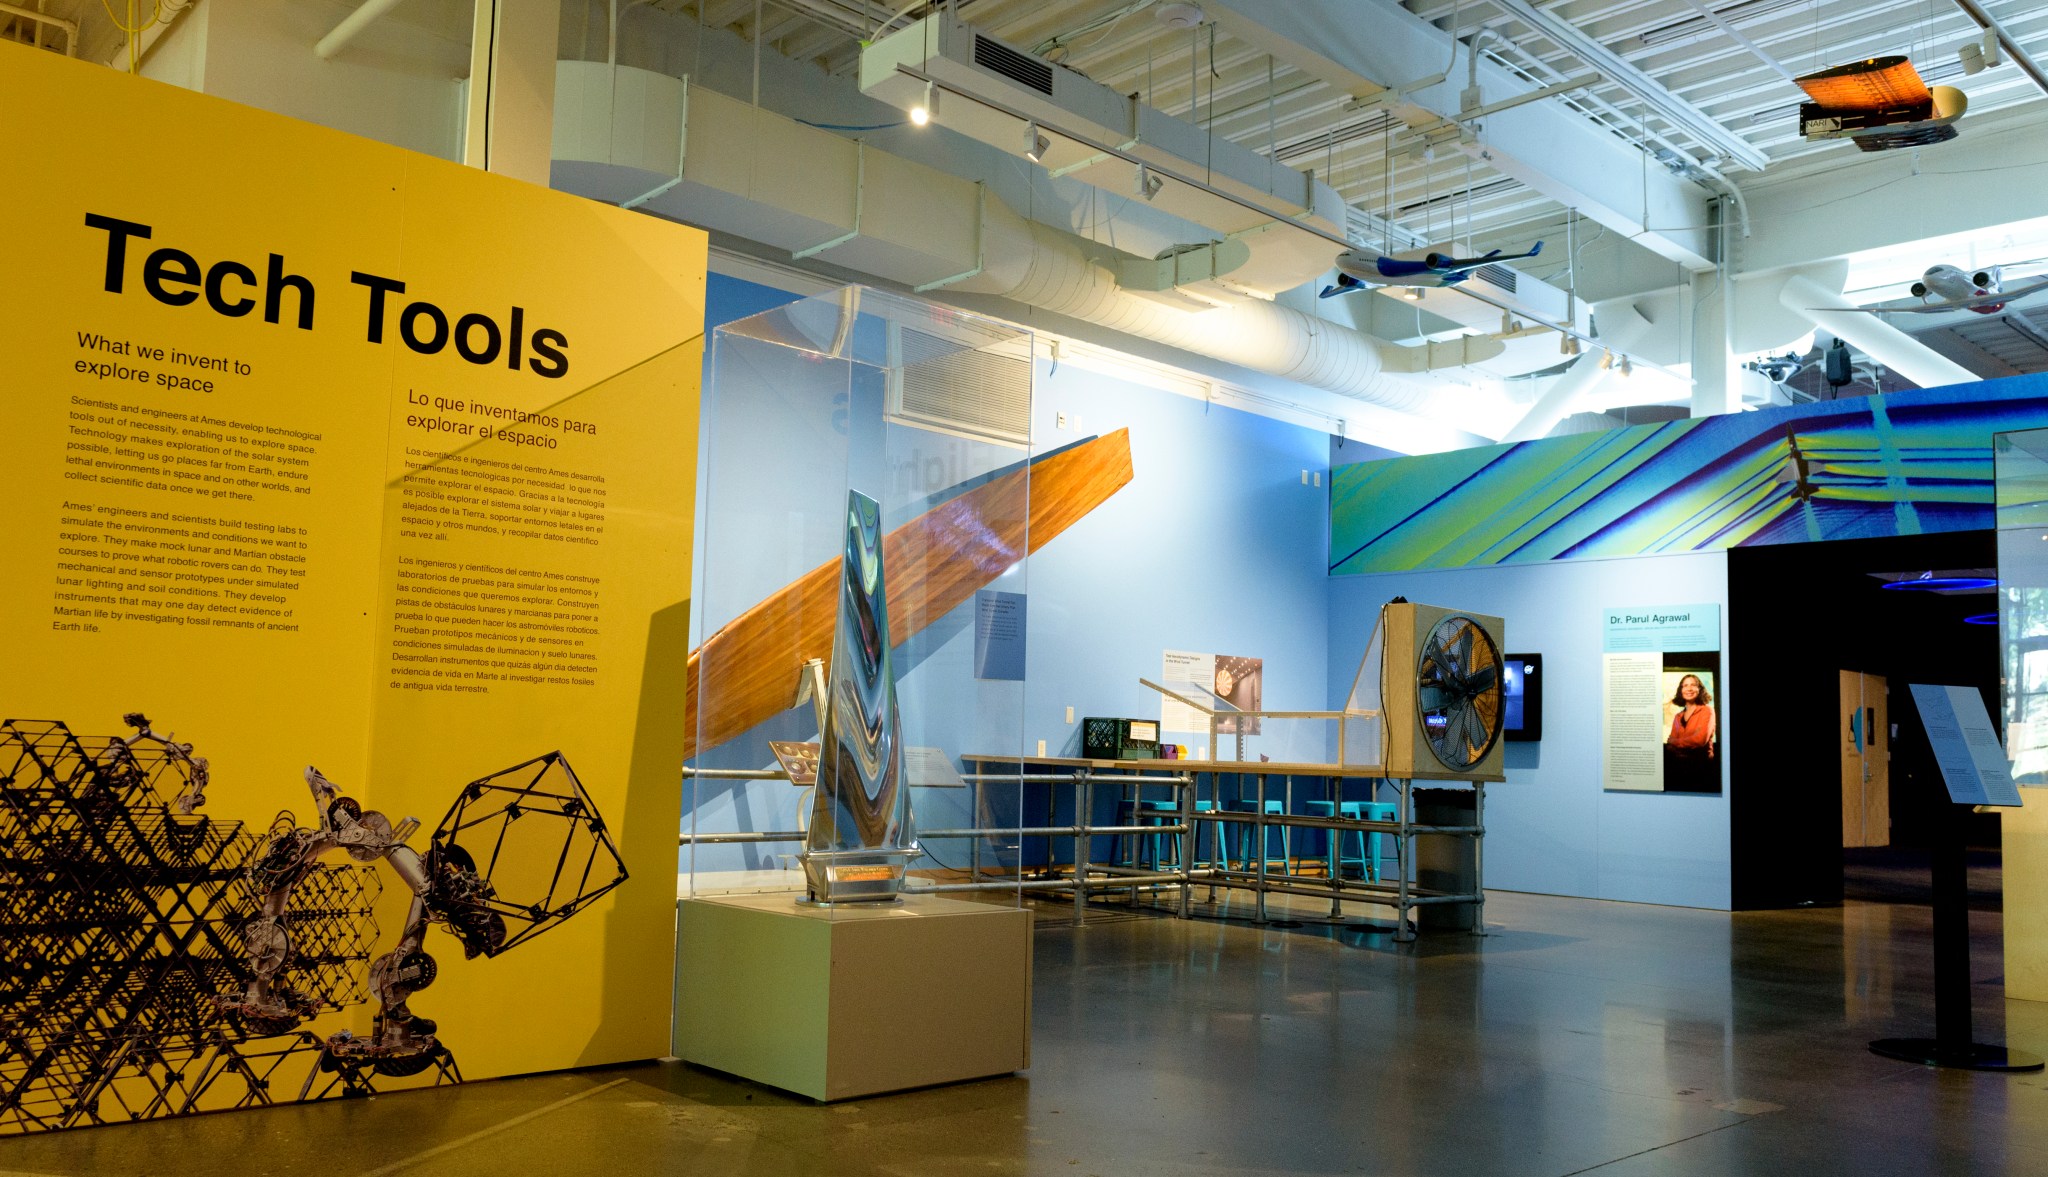 A wide shot of the new NASA Ames Visitor Center at Chabot Space & Science Center. At left, an exhibit description "Tech Tools" with a description of engineering work at Ames. At center and right, several historic pieces of Ames equipment are on display.